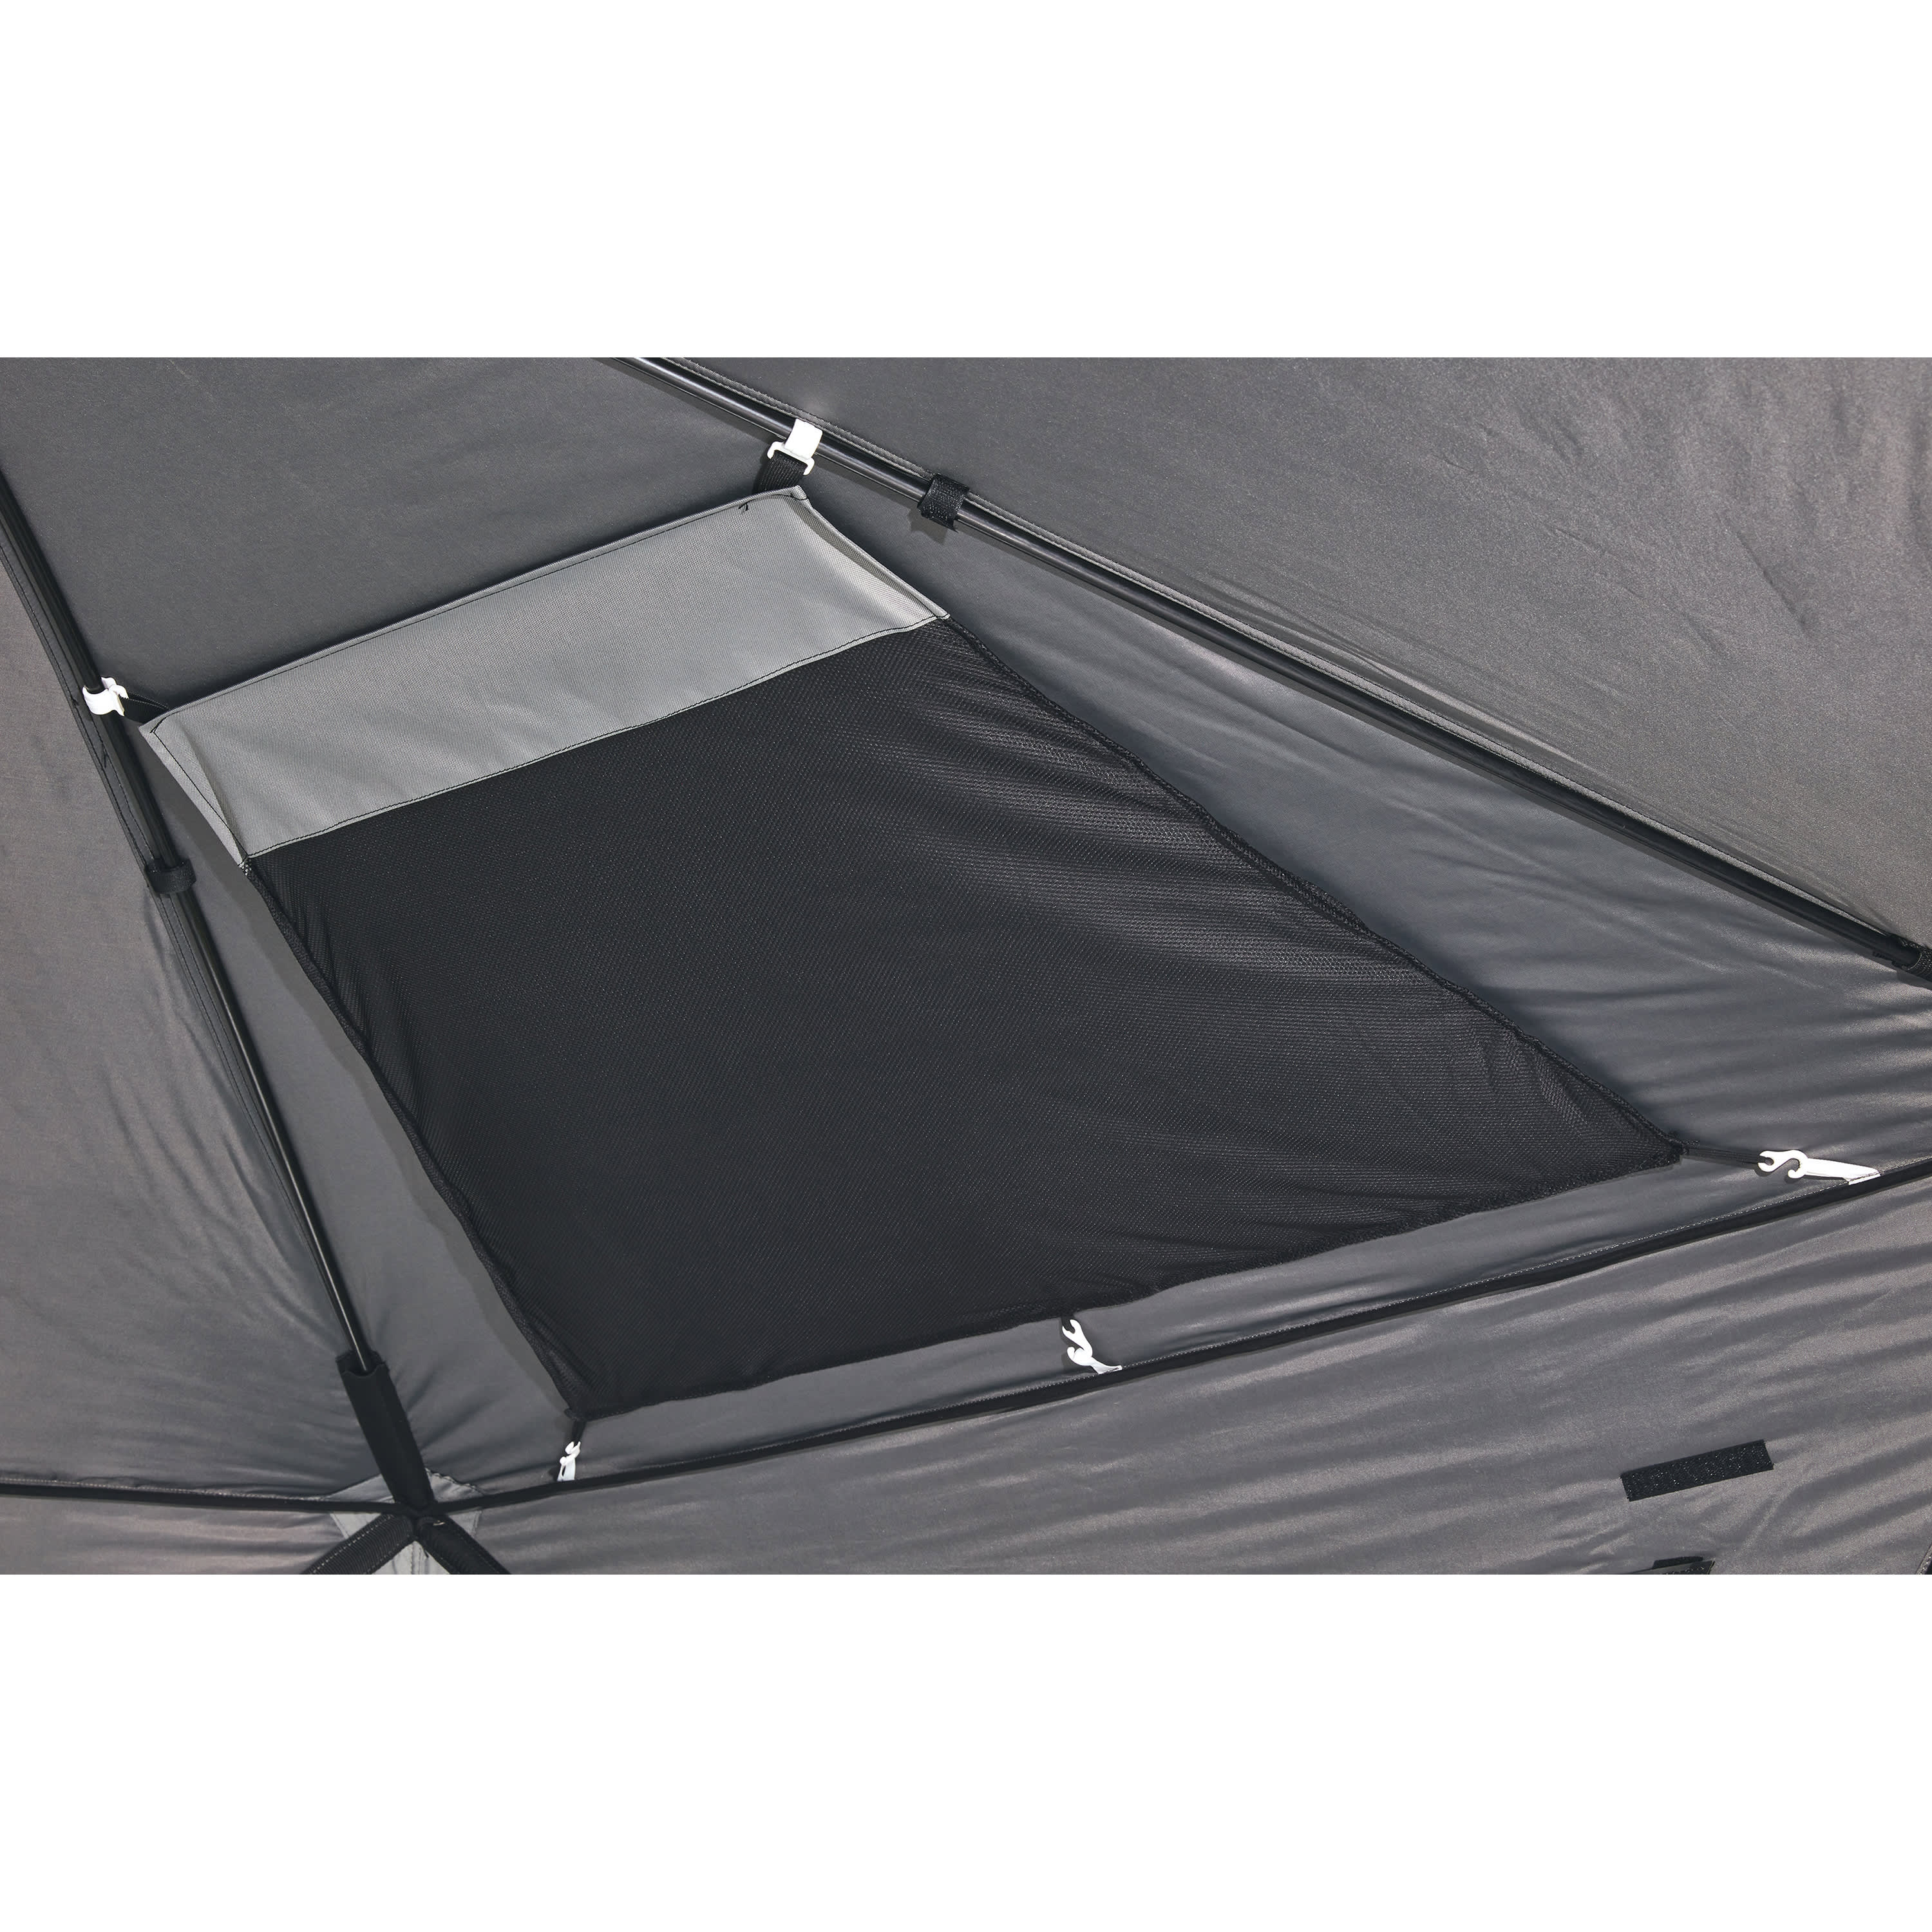 Bass Pro Shops® XPS® 6-Sided Thermal Wide-Door Ice Shelter